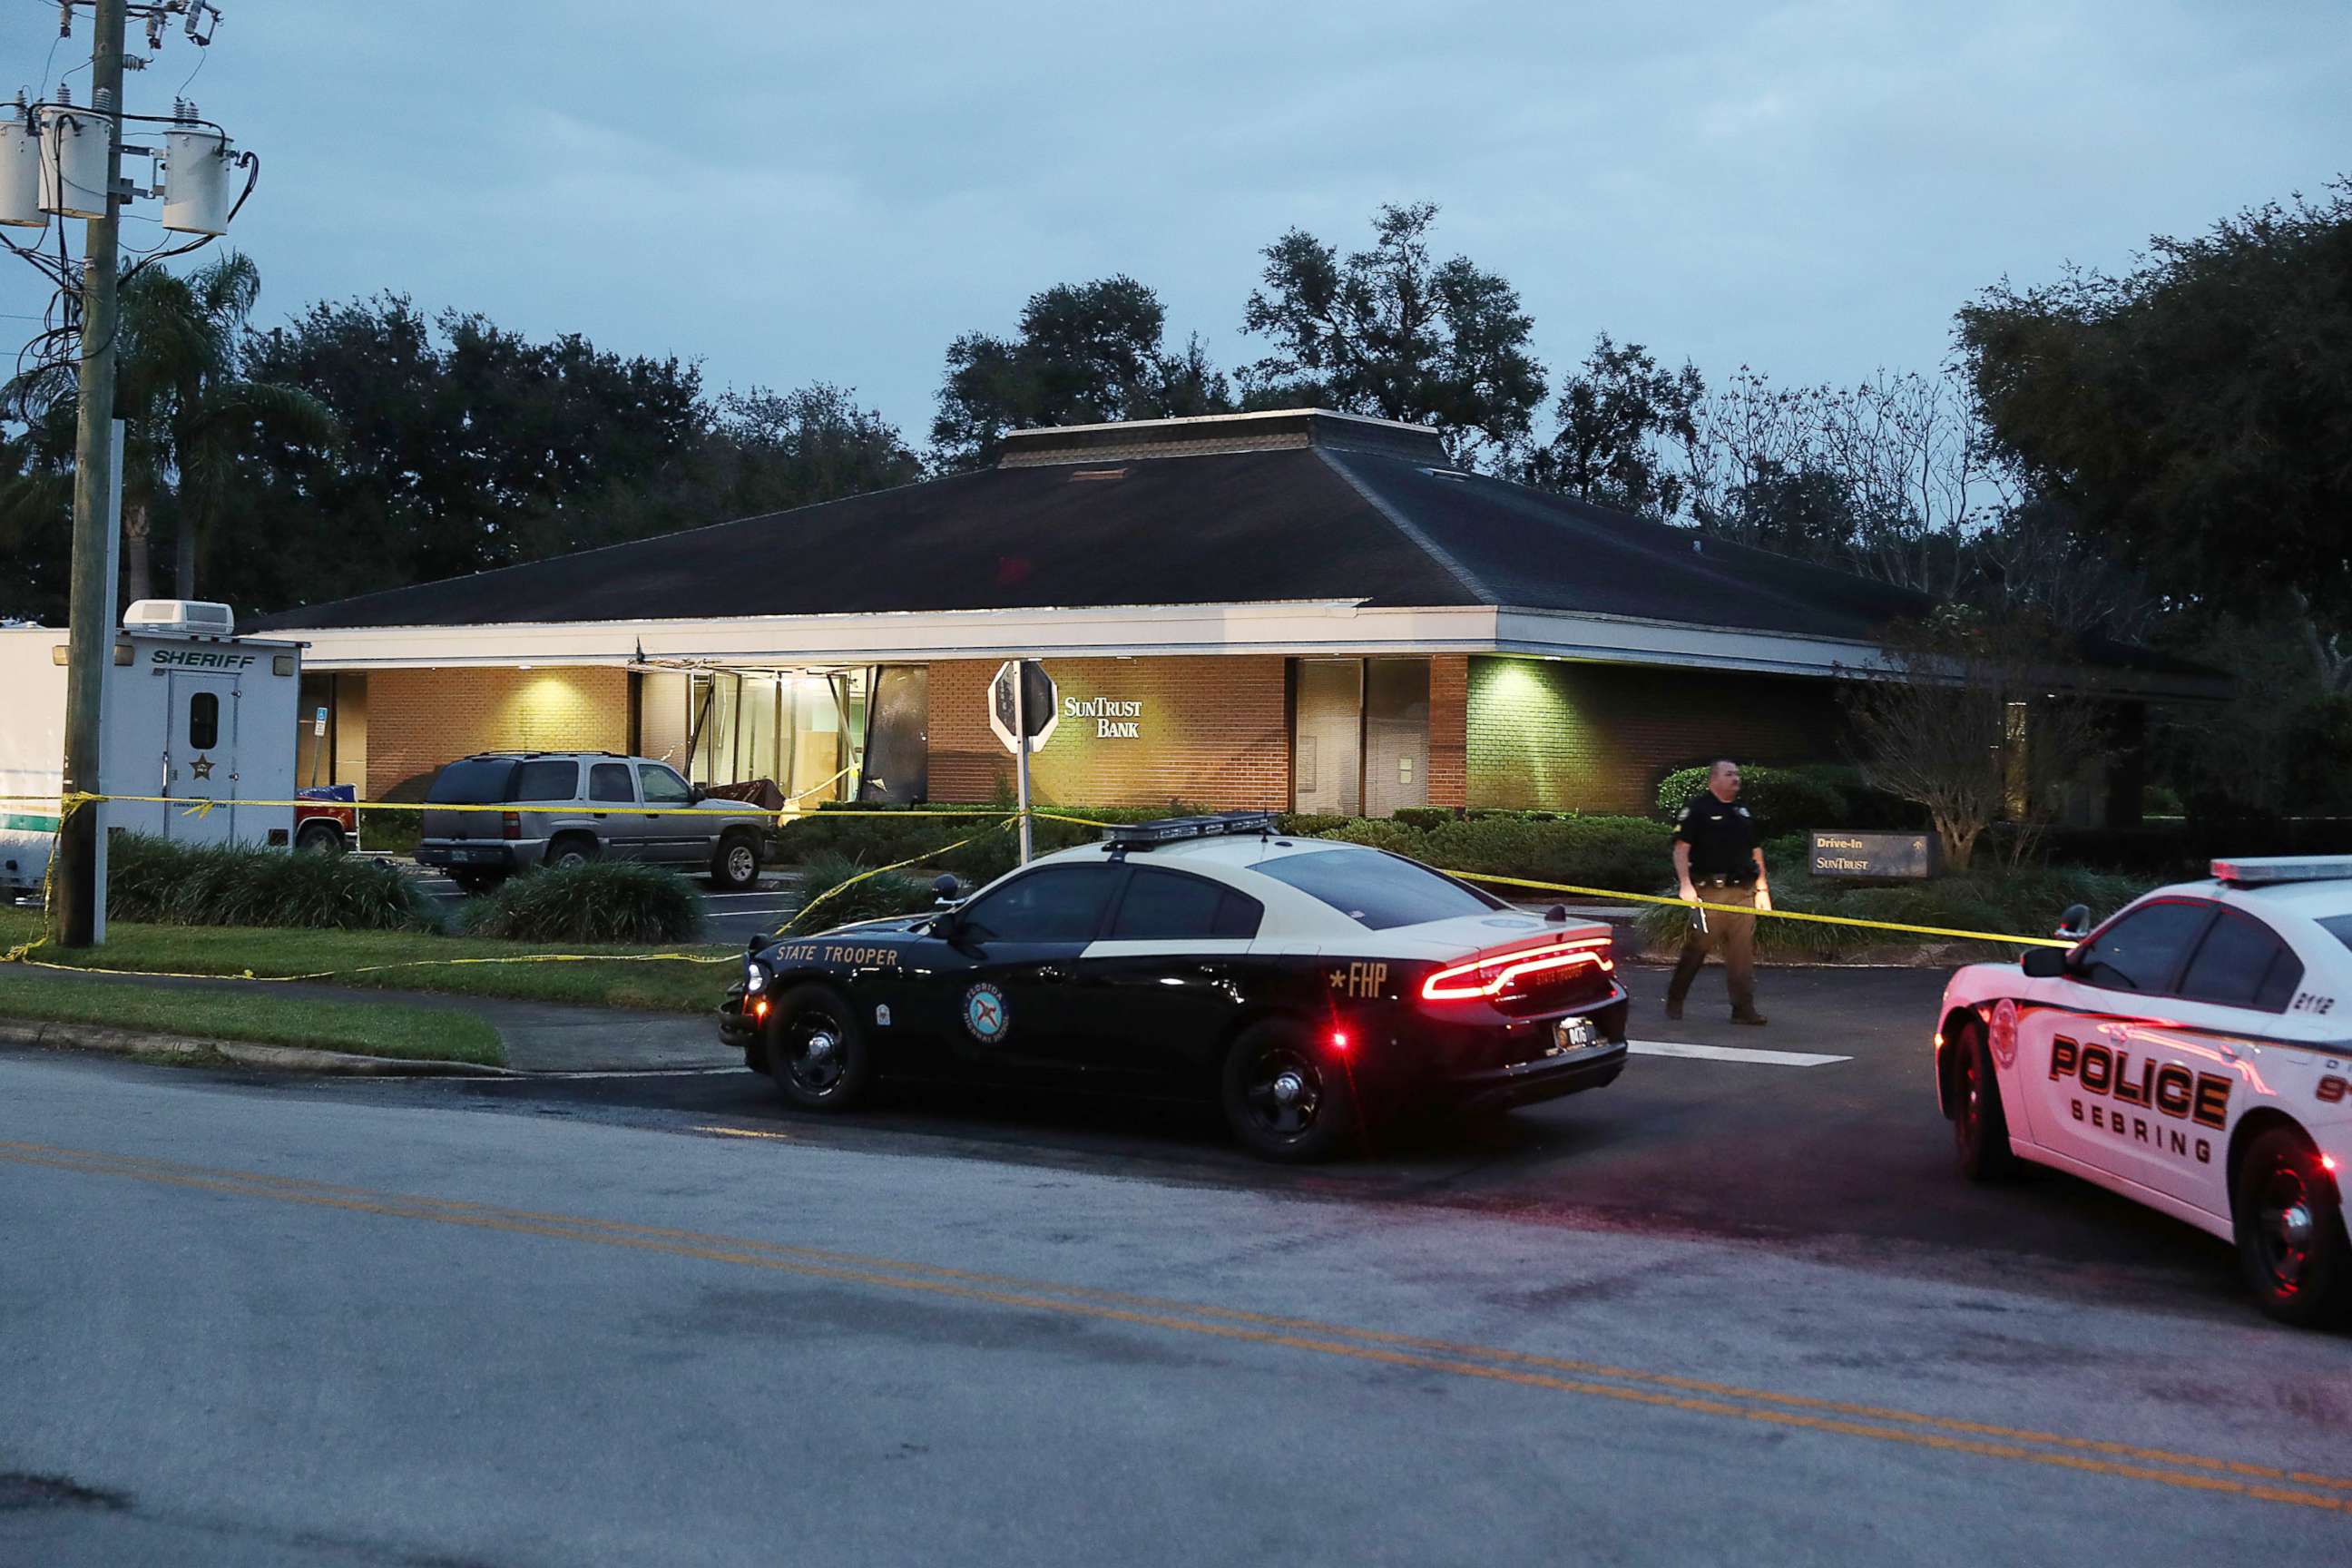 PHOTO: The SunTrust Bank branch is seen as law enforcement officials continue to investigate the scene Jan. 24, 2019 in Sebring, Fla.